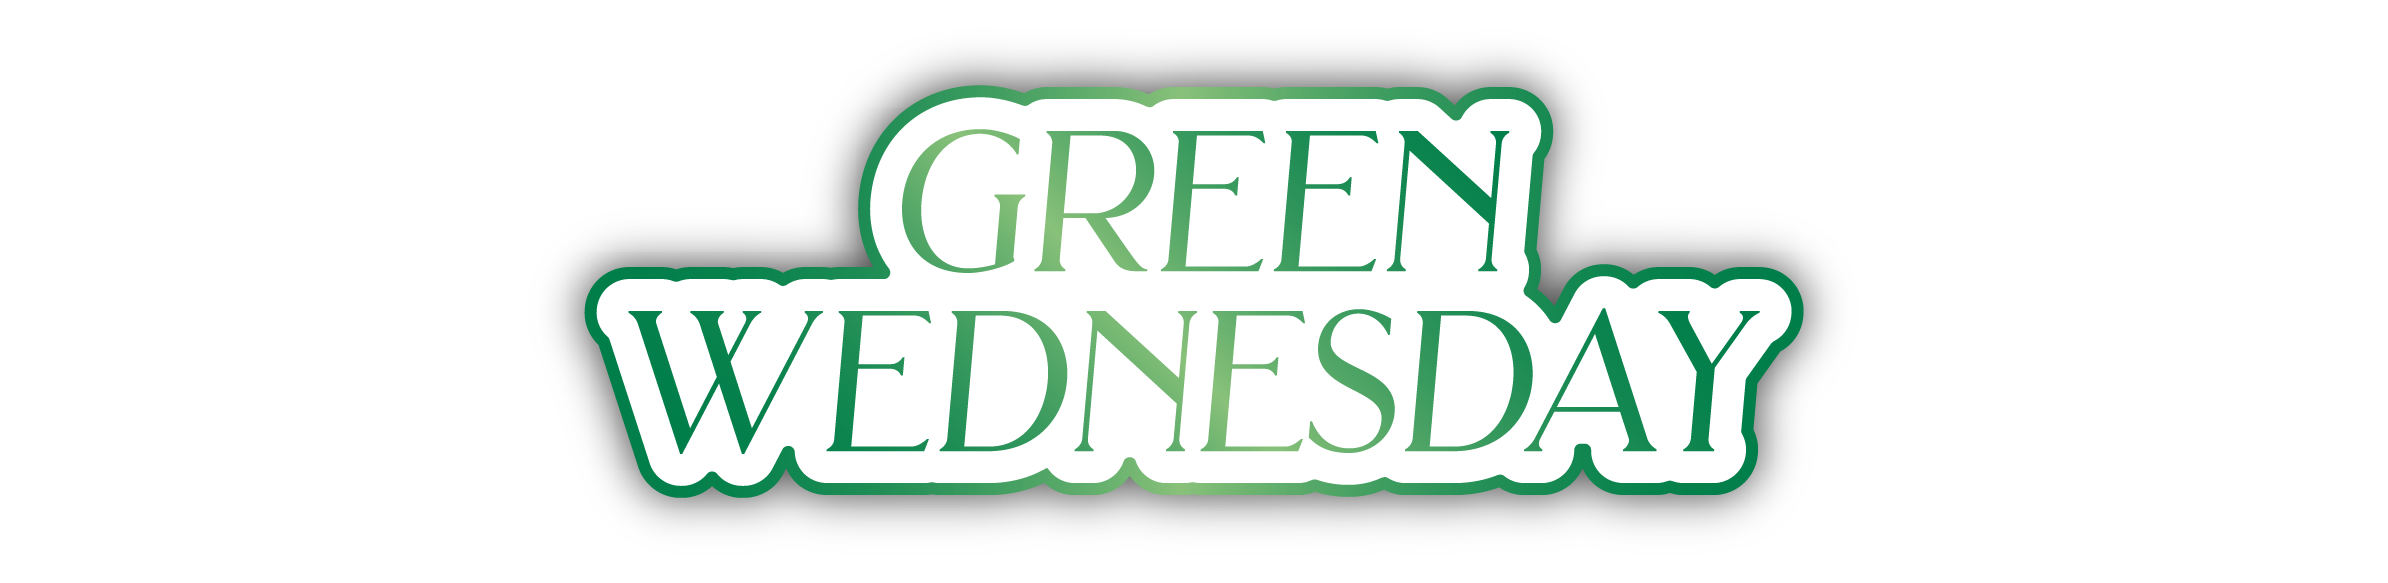 Green Wednesday Deals, Mellow Fellow Green Wednesday Deals on THC products CBD products